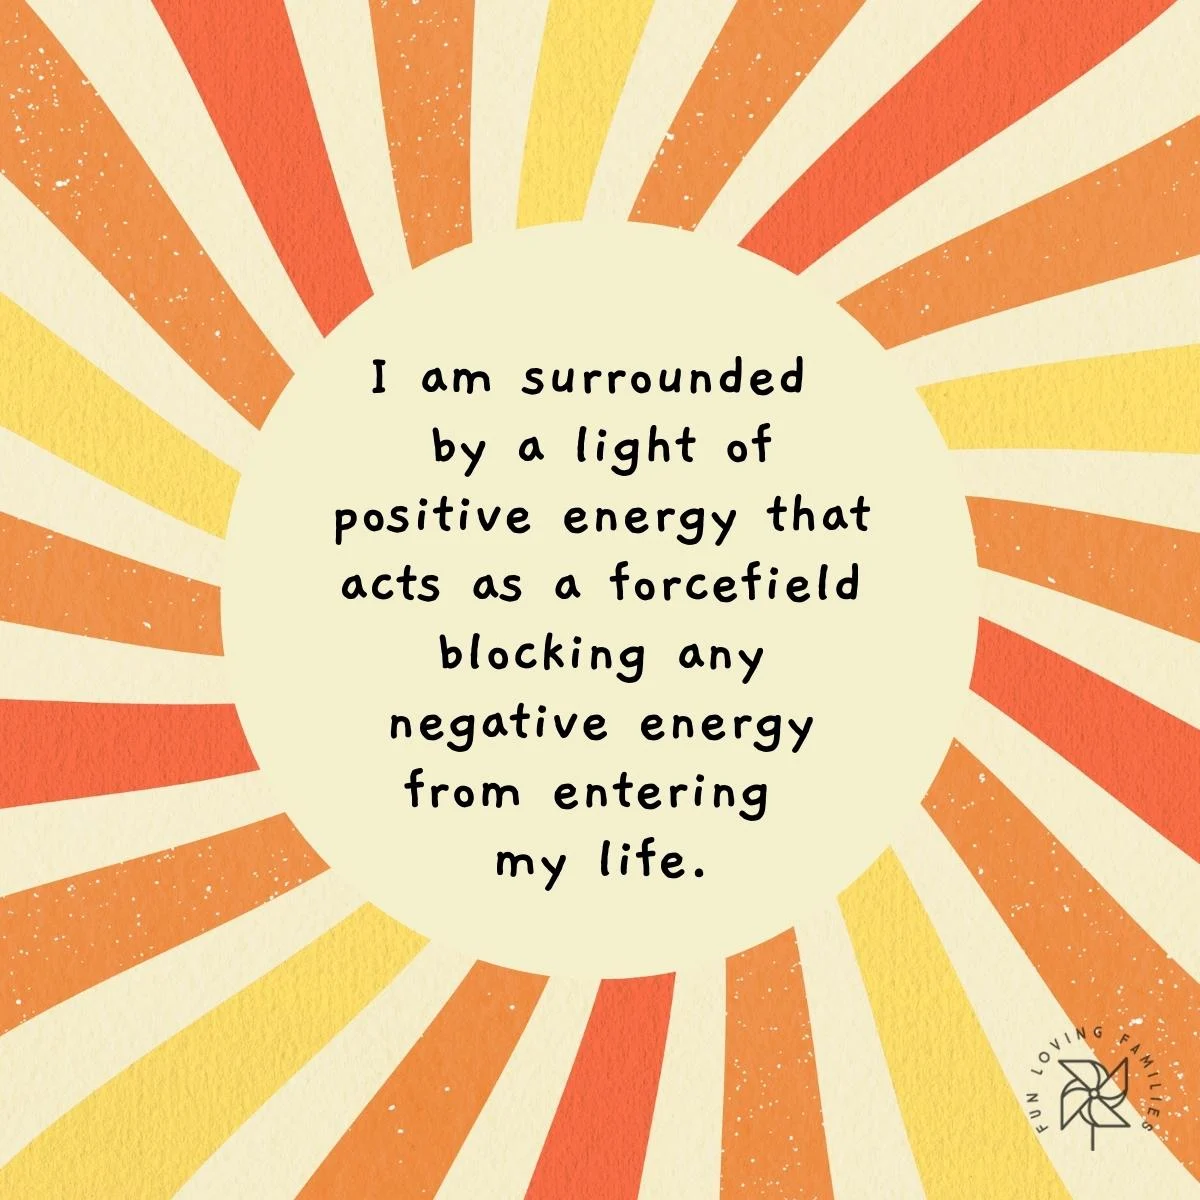 I am surrounded by a light of positive energy affirmation